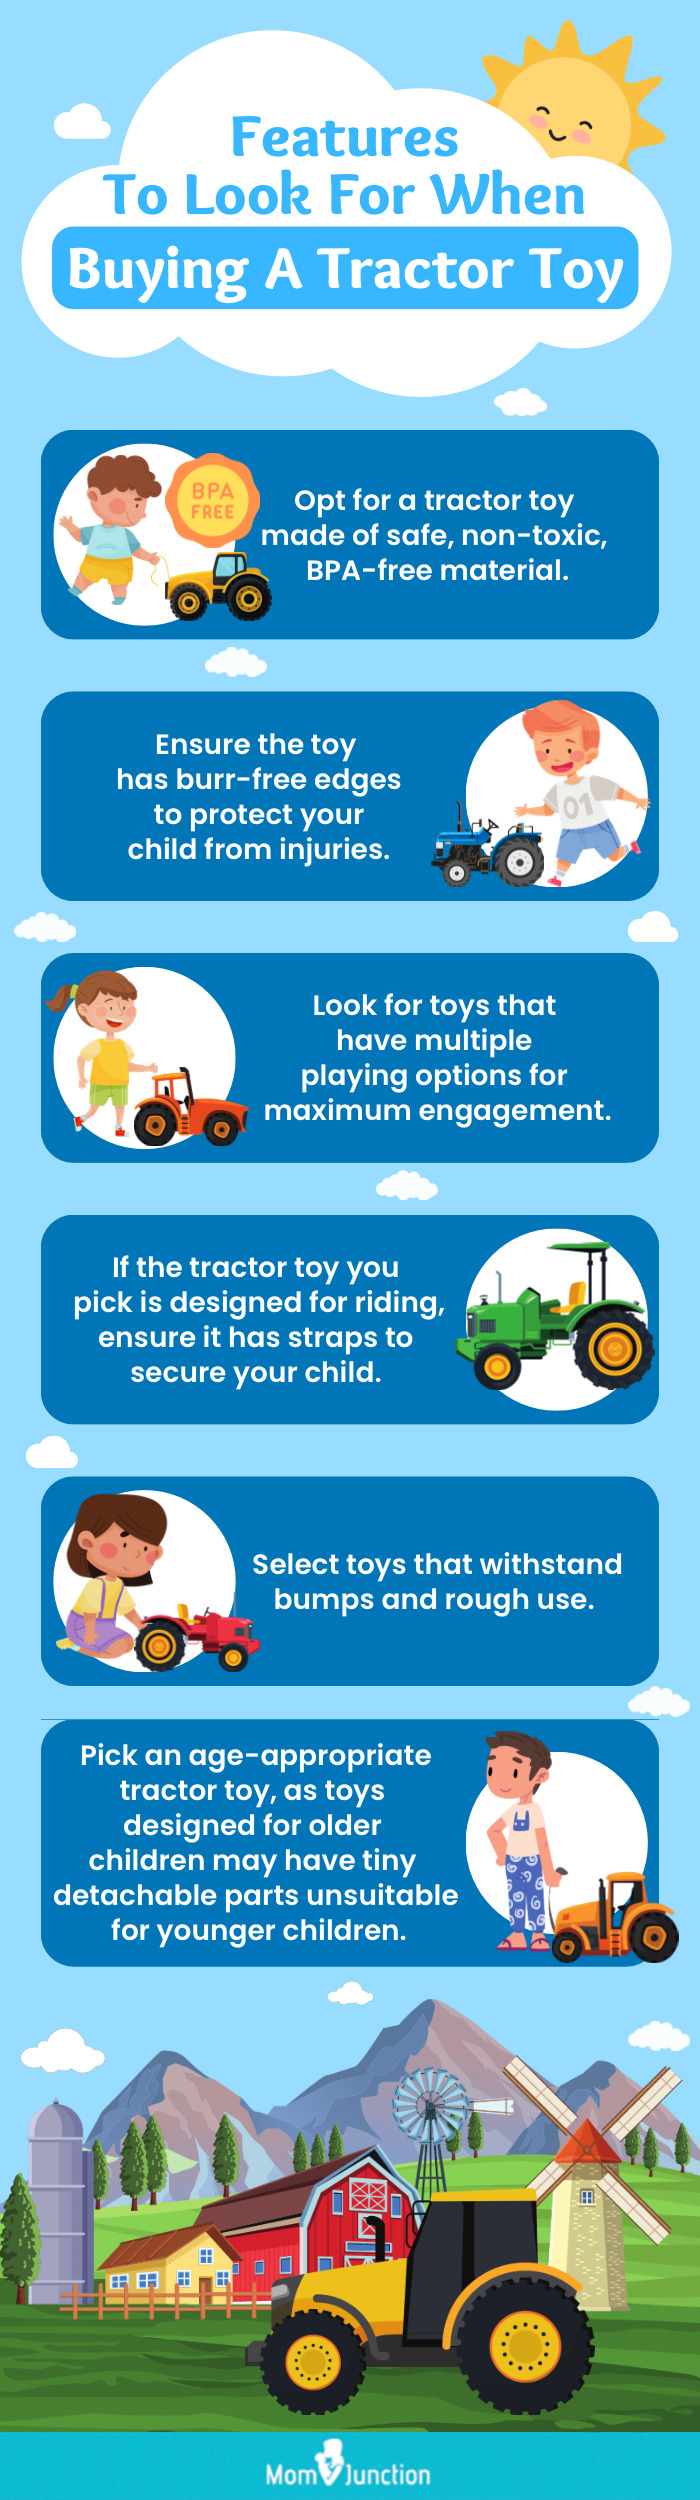 Features To Look For When Buying A Tractor Toy